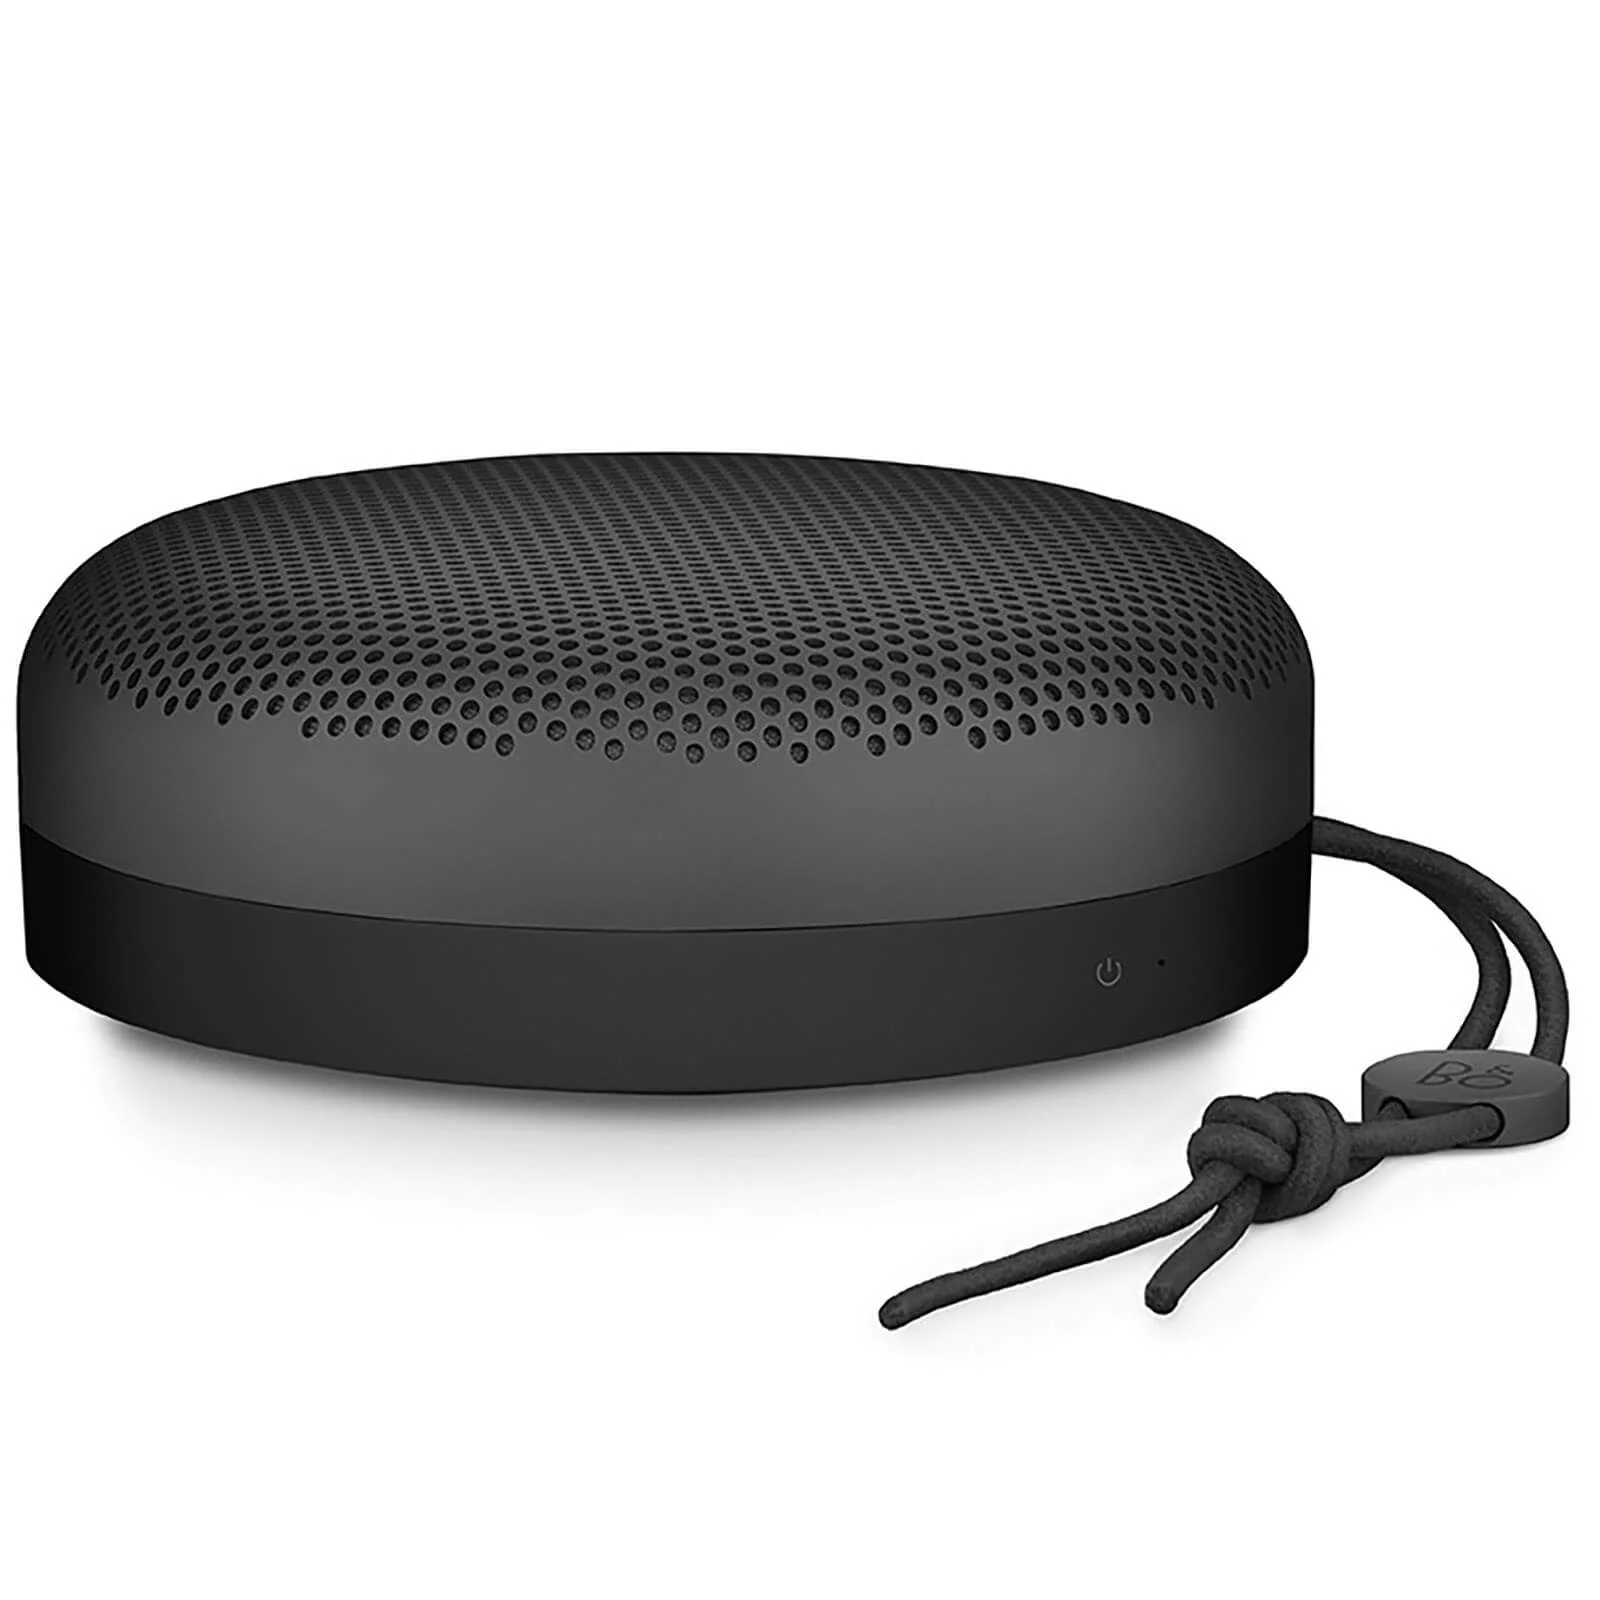 Bang & Olufsen BeoPlay A1 Portable Bluetooth Speaker - Black Image 1